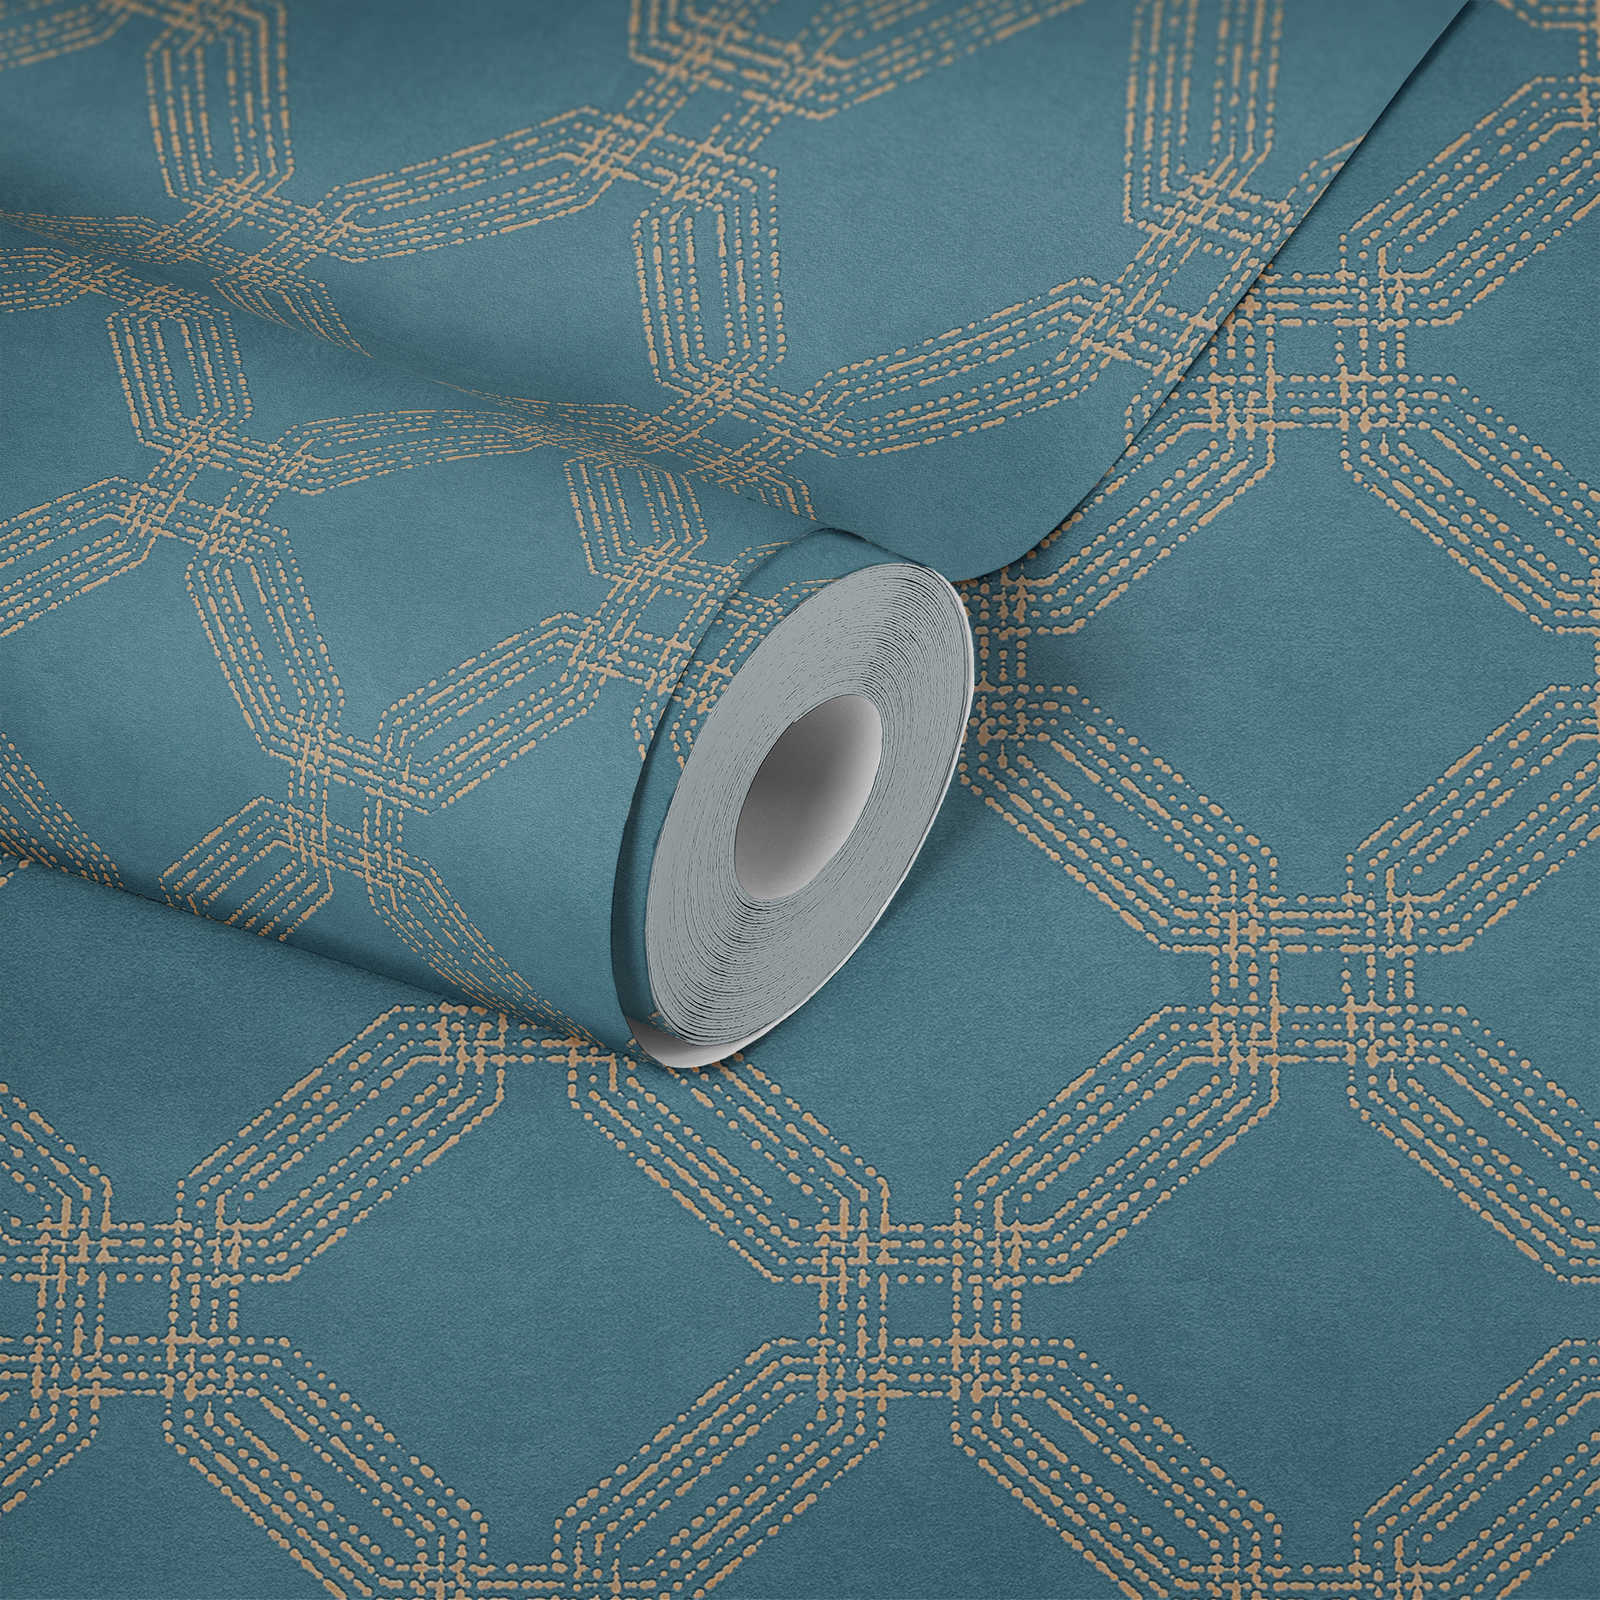             Wallpaper with diamond look, textured - blue, gold
        